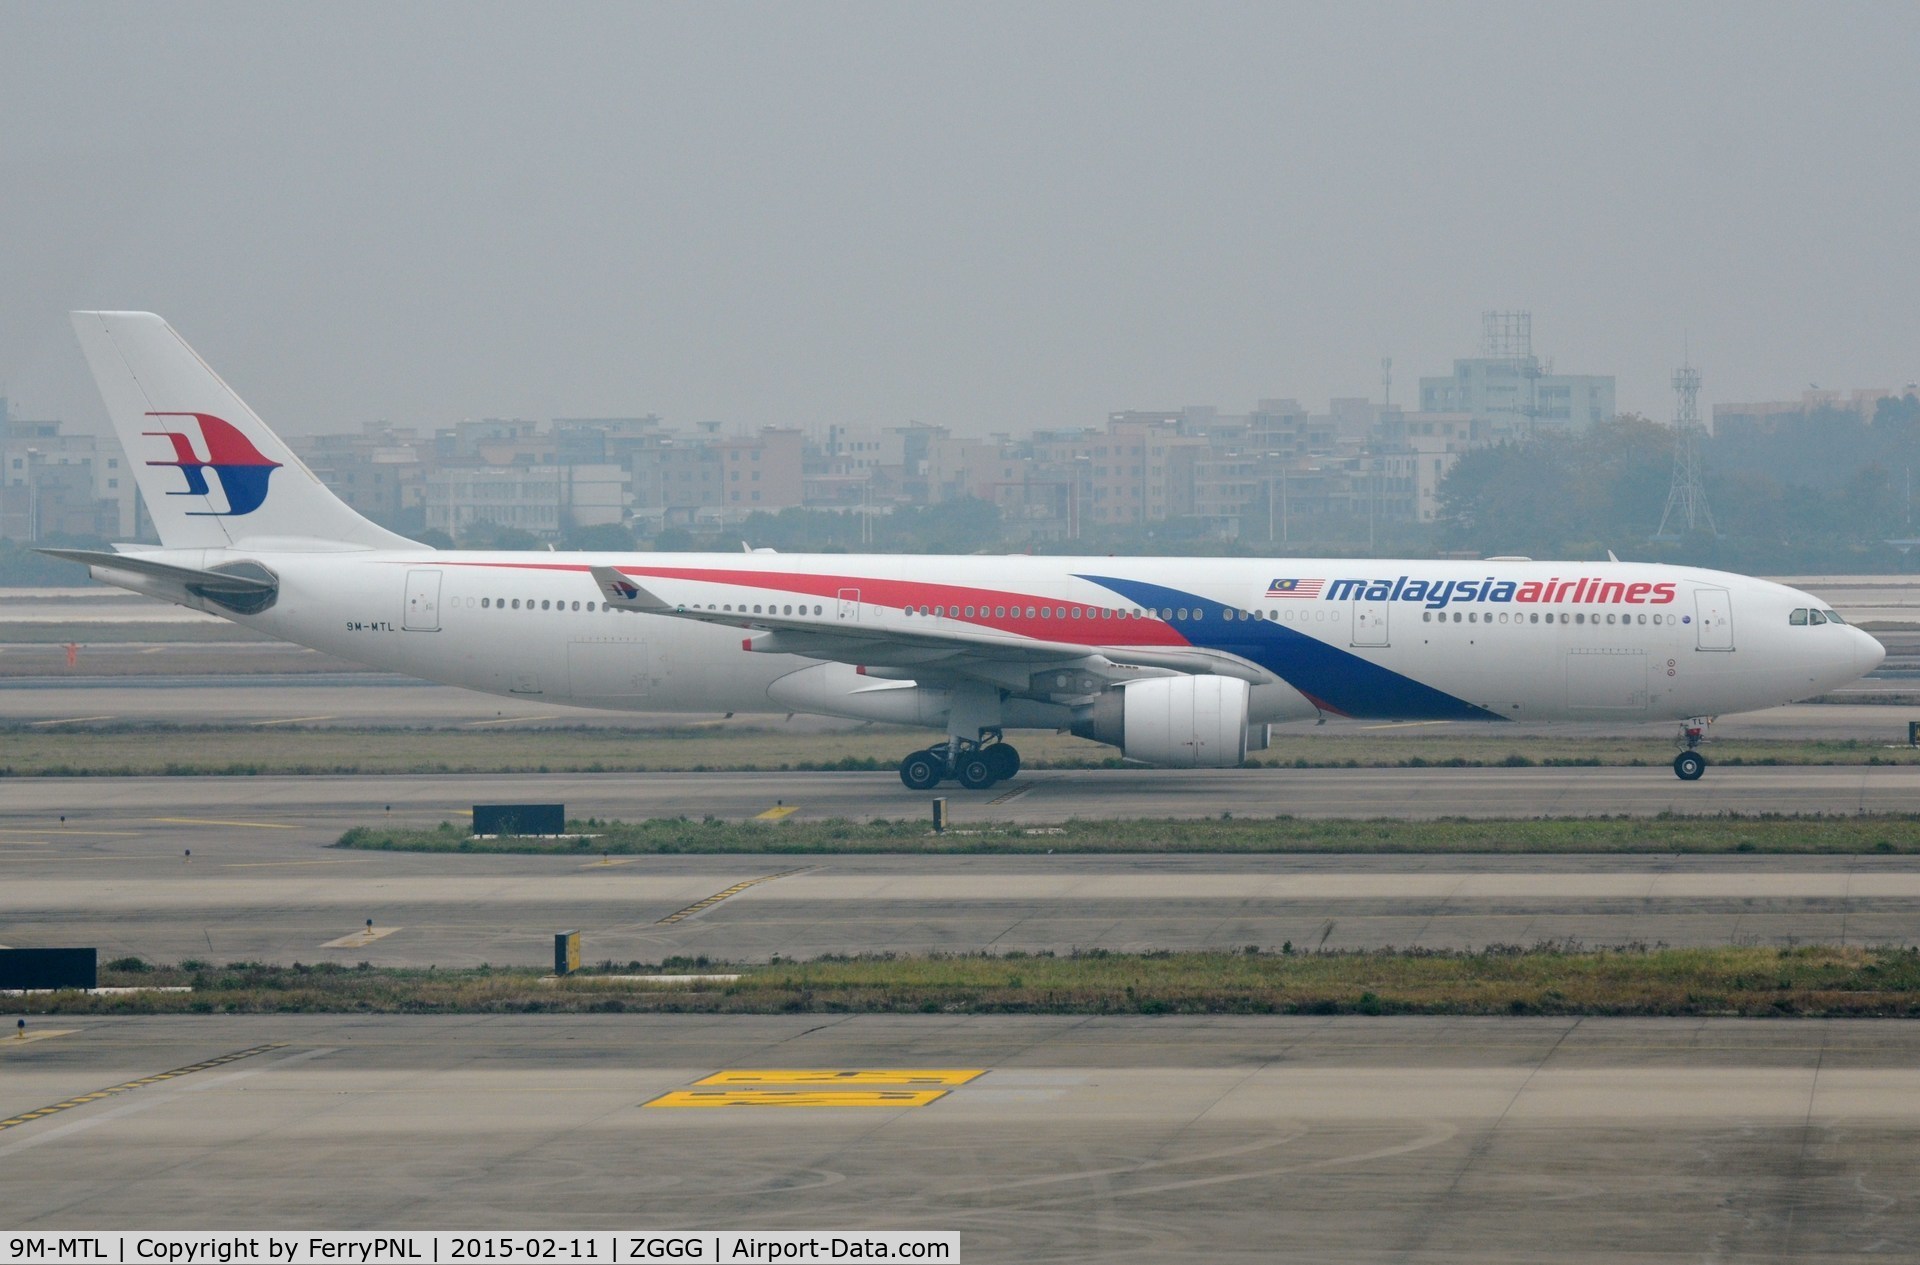 9M-MTL, 2013 Airbus A330-323X C/N 1395, Malaysian A333 just arrived from KUL